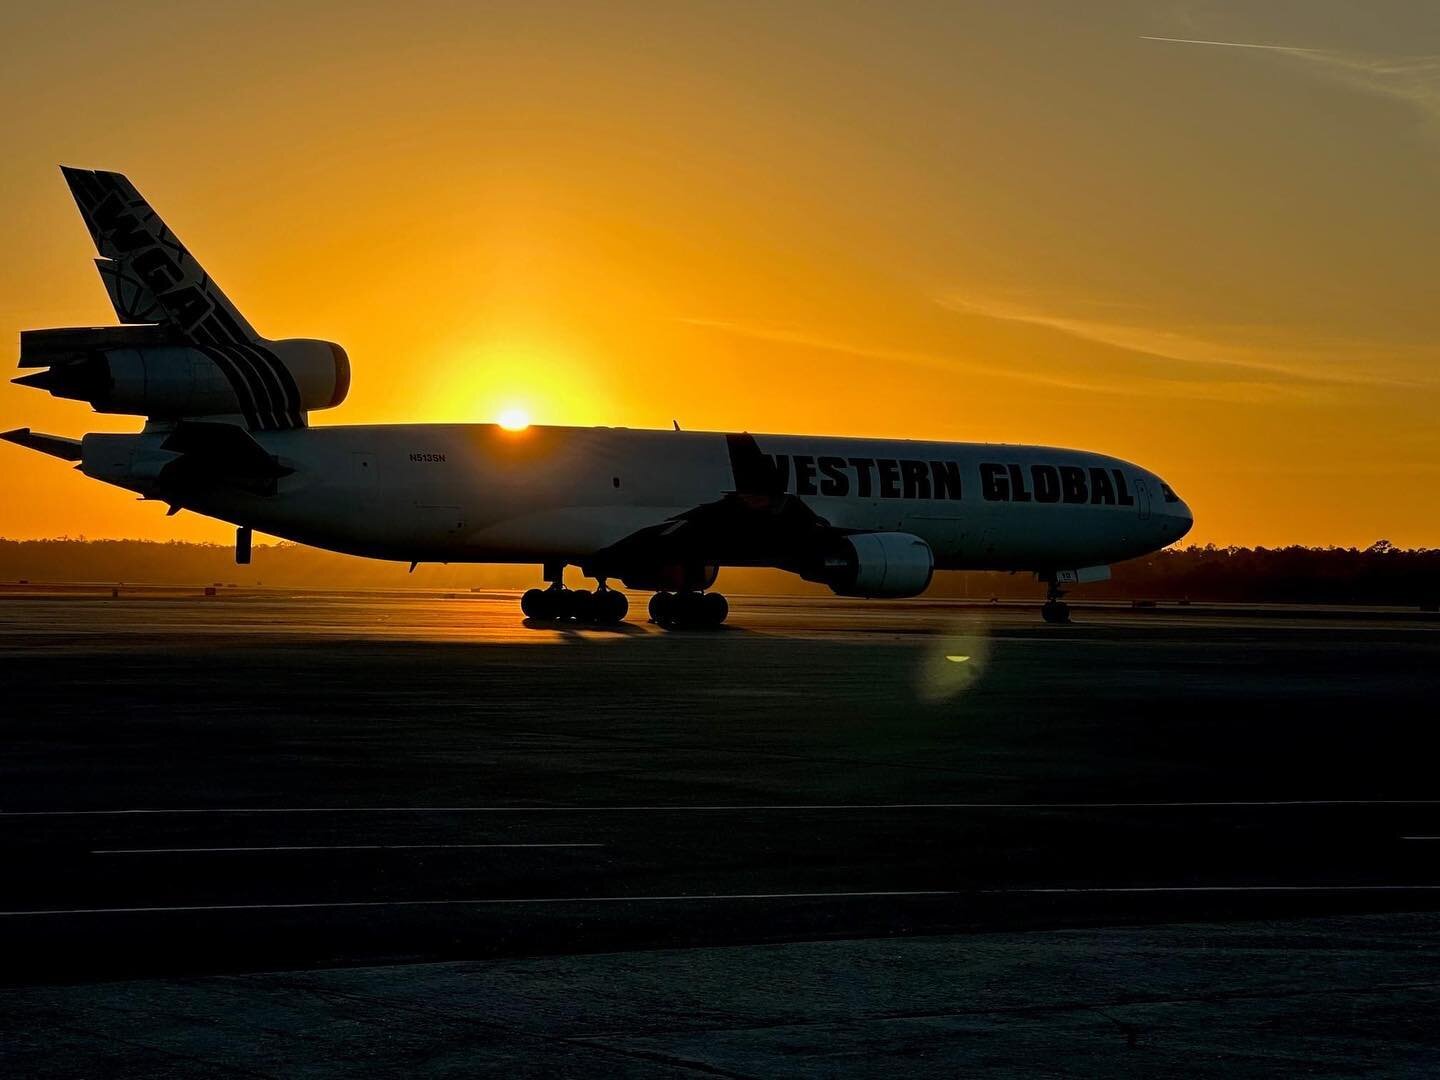 A stunning #swfl #sunrise over this #md11 at @flyrsw this morning was captured by Capt. Dibbley ✈️